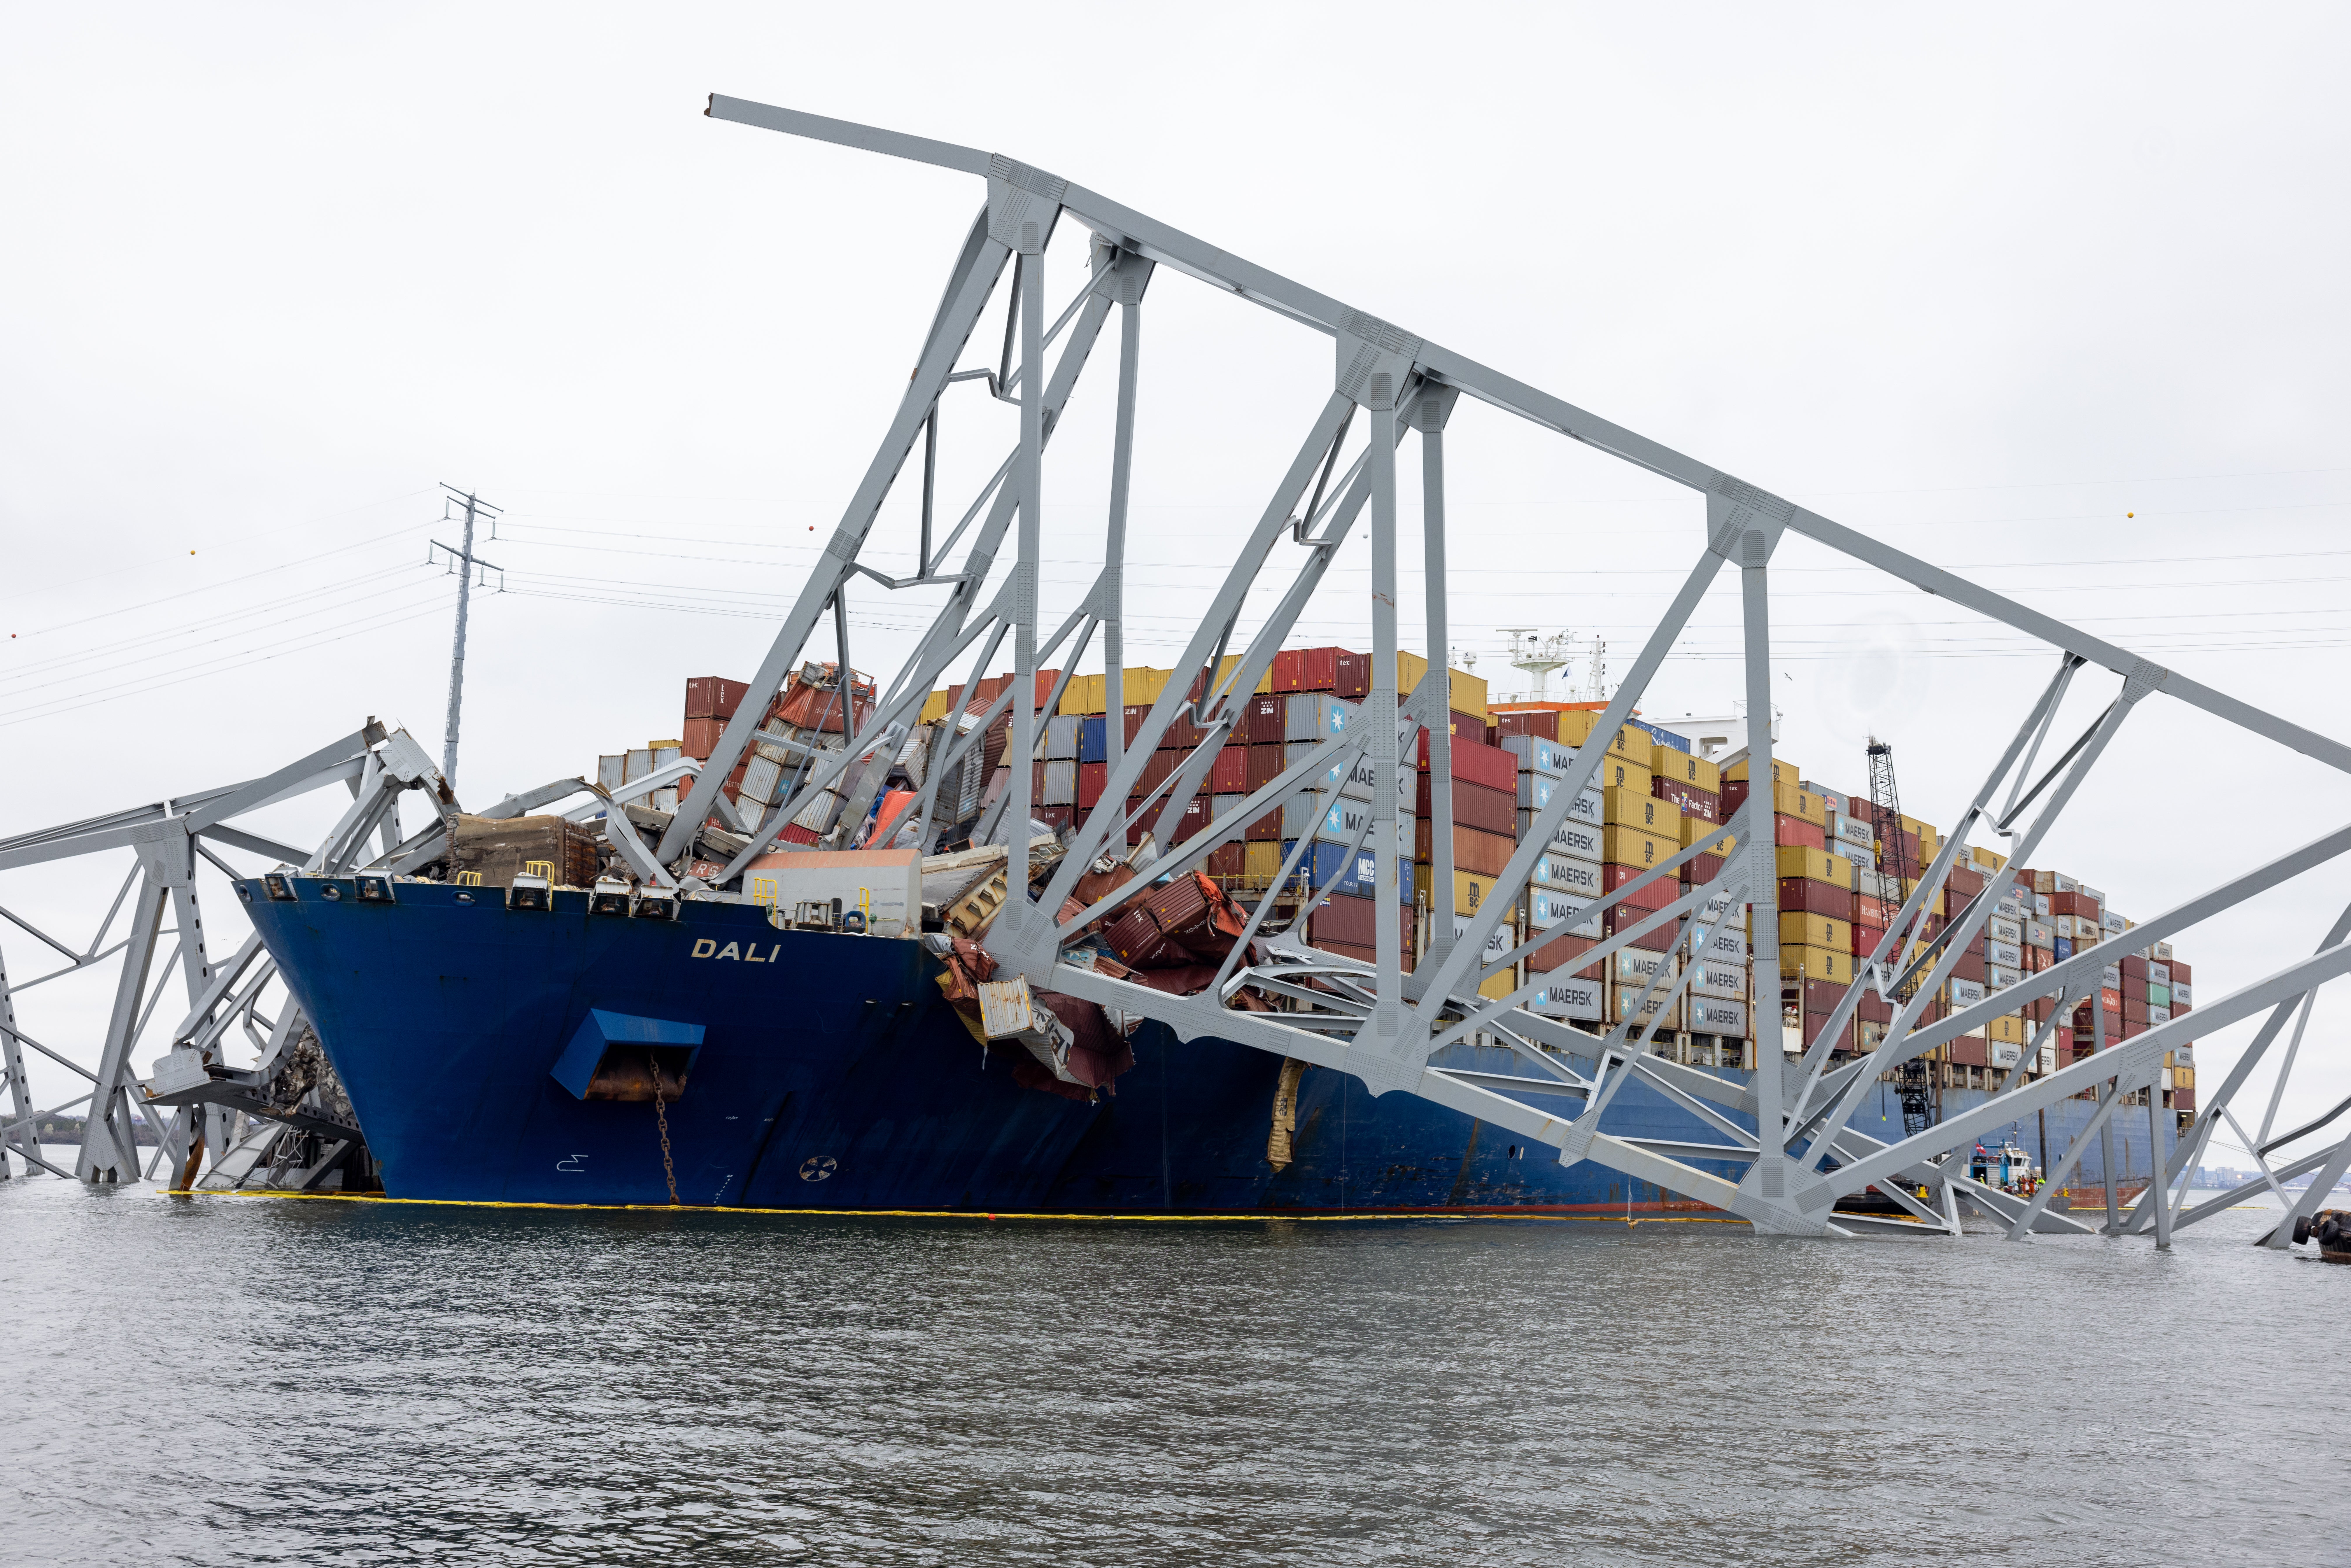 Wreckage from the collapsed Francis Scott Key Bridge rests on the cargo ship Dali